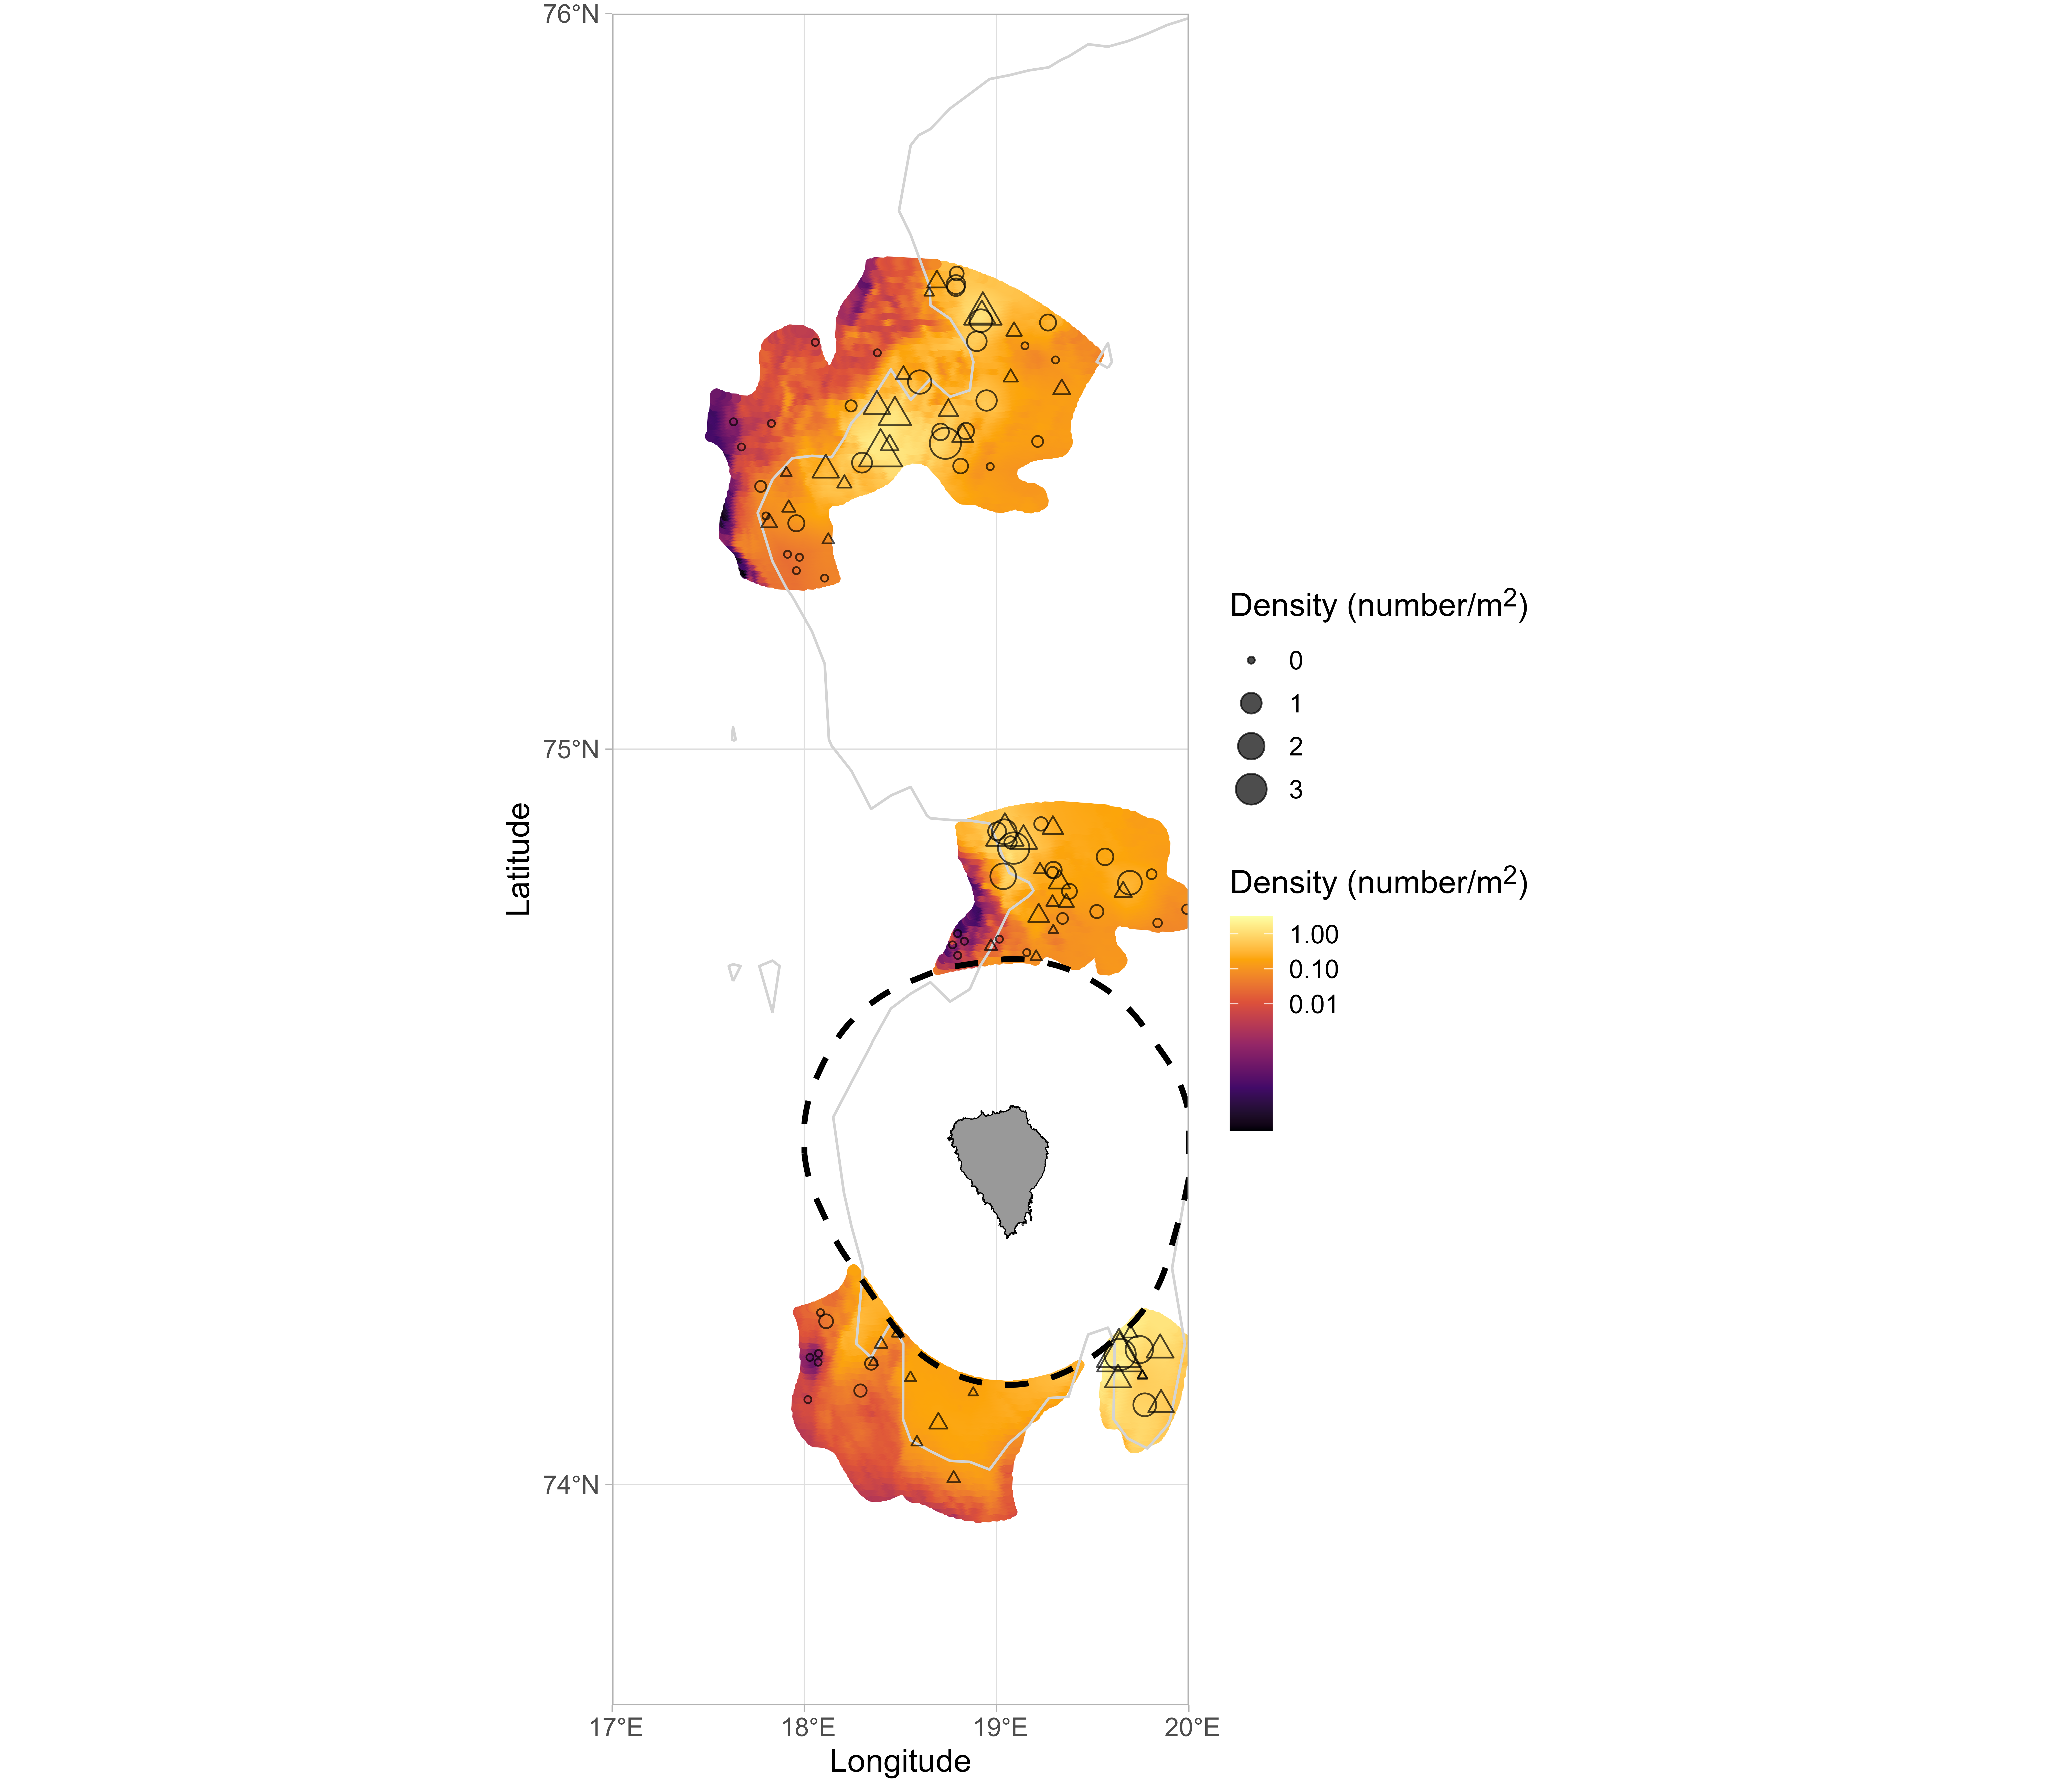 Density of scallops in Bear Island area (Concordia, Kveitehola and Bear Island SE scallop beds, from north to south). Shown are observed densities from vid_eo transects and dredge stations (circles with radius scaled to density) overlaid on predicted densities from spatial GAMM including weighted video and dredge observations used to estimate stock size (color scale). Land masses are indicated in grey, protected areas with dashed lines, and 100m depth contour with solid grey lines. Note that densities are on log10-scale.